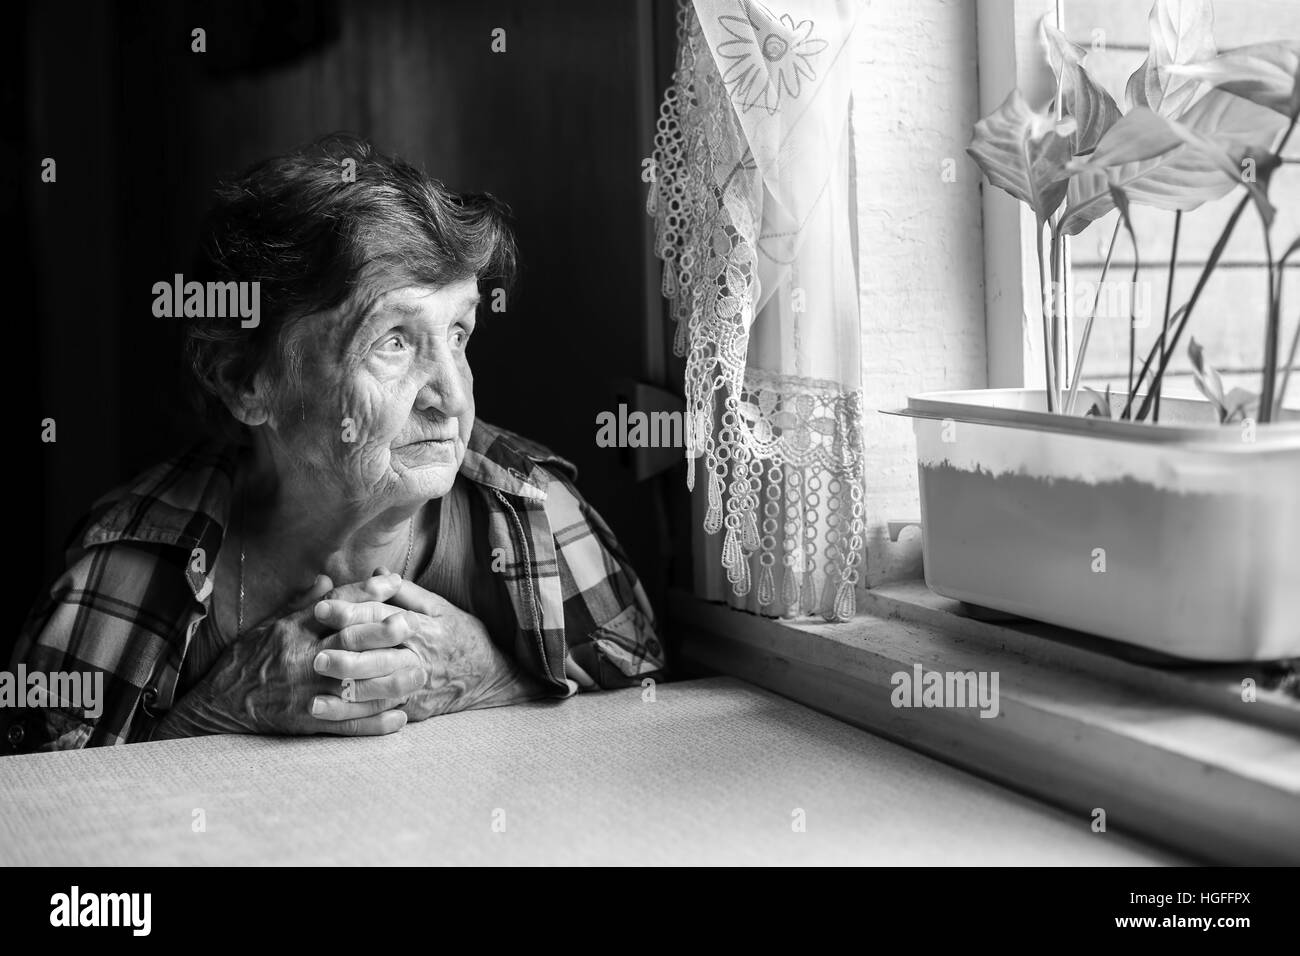 Elderly woman looks wistfully out the window. Black-and-white photo. Stock Photo